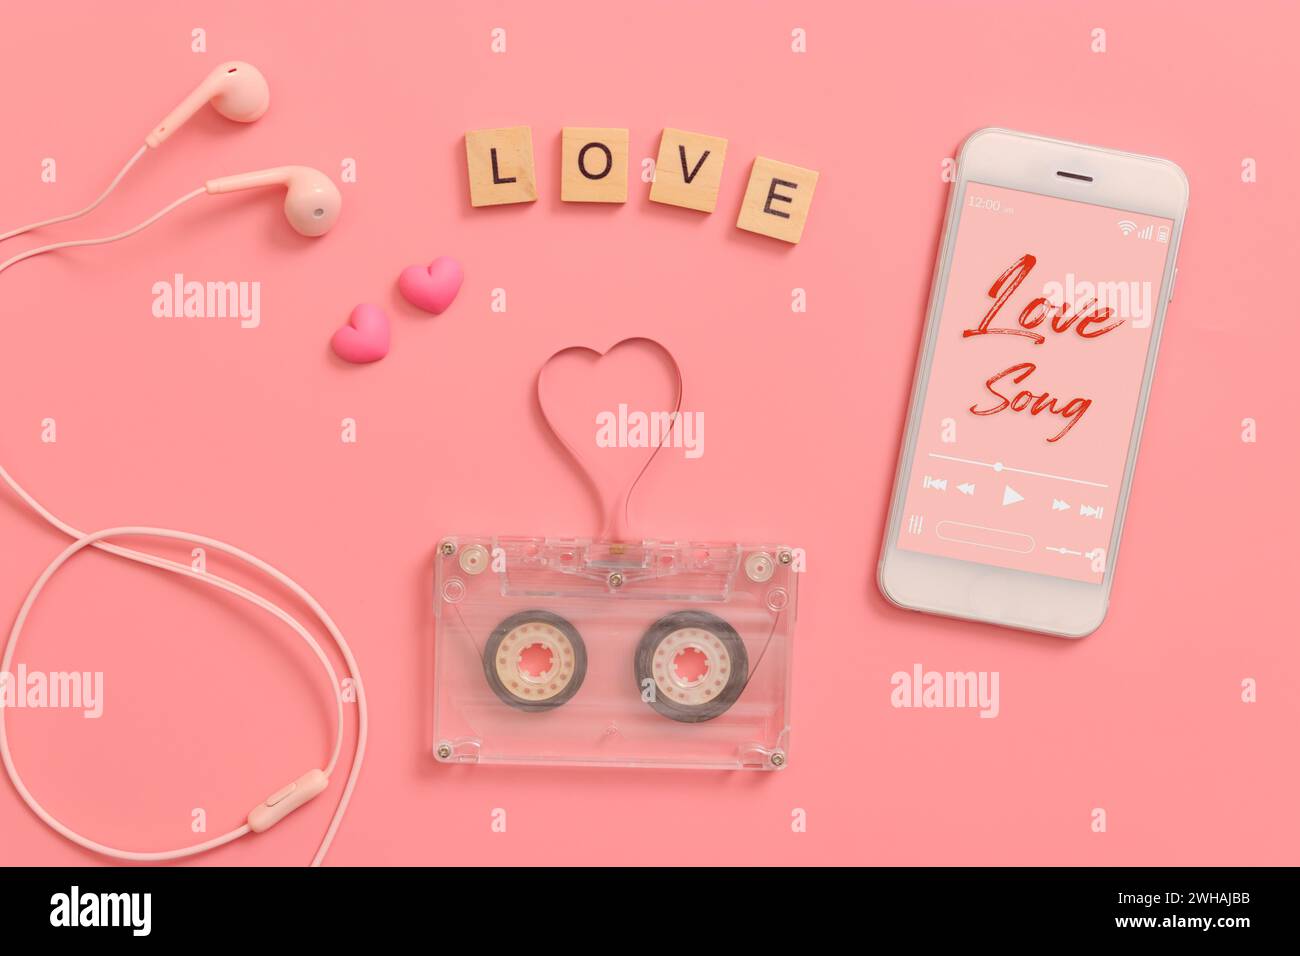 vintage transparent audio cassette magnetic tape in shape of heart, earphones, mobile phone playing love song on screen. flat lay Valentine's Day musi Stock Photo